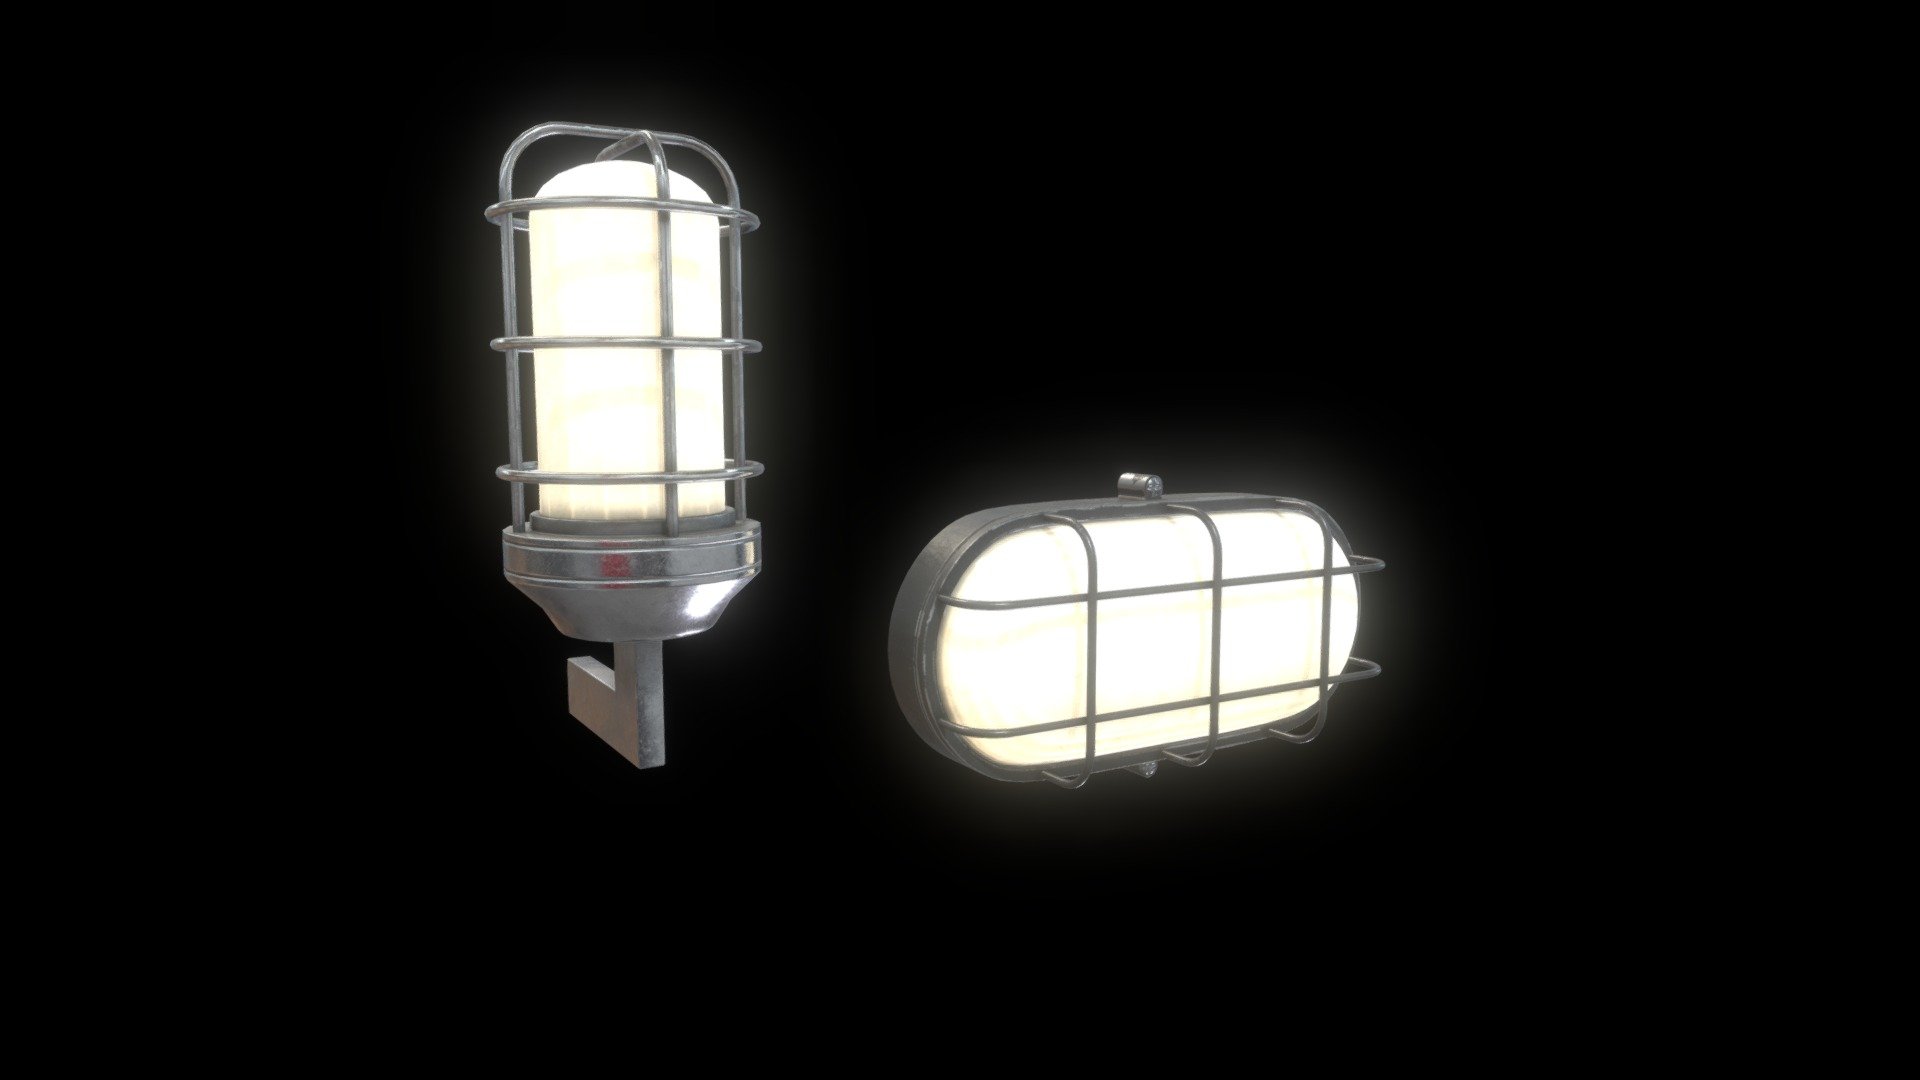 Two bunker lights suitable for various settings like inustrial and apocalyptic environments 3d model